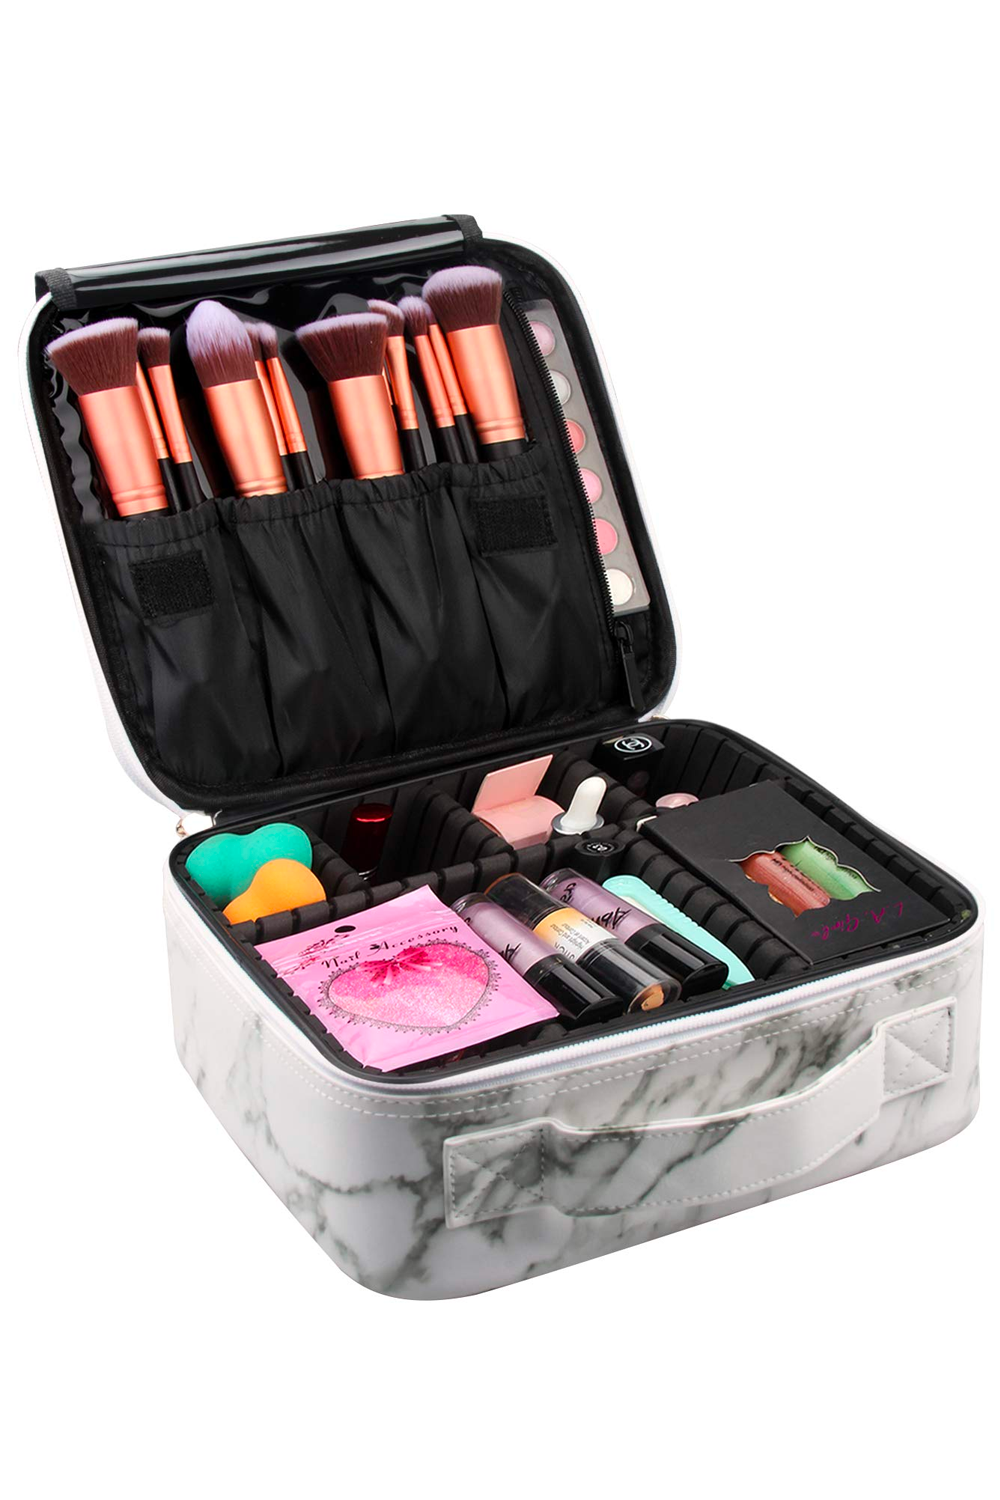 Lowestbest Makeup Case, Professional 14 23 Best Makeup Bags and Cosmetic Ca...